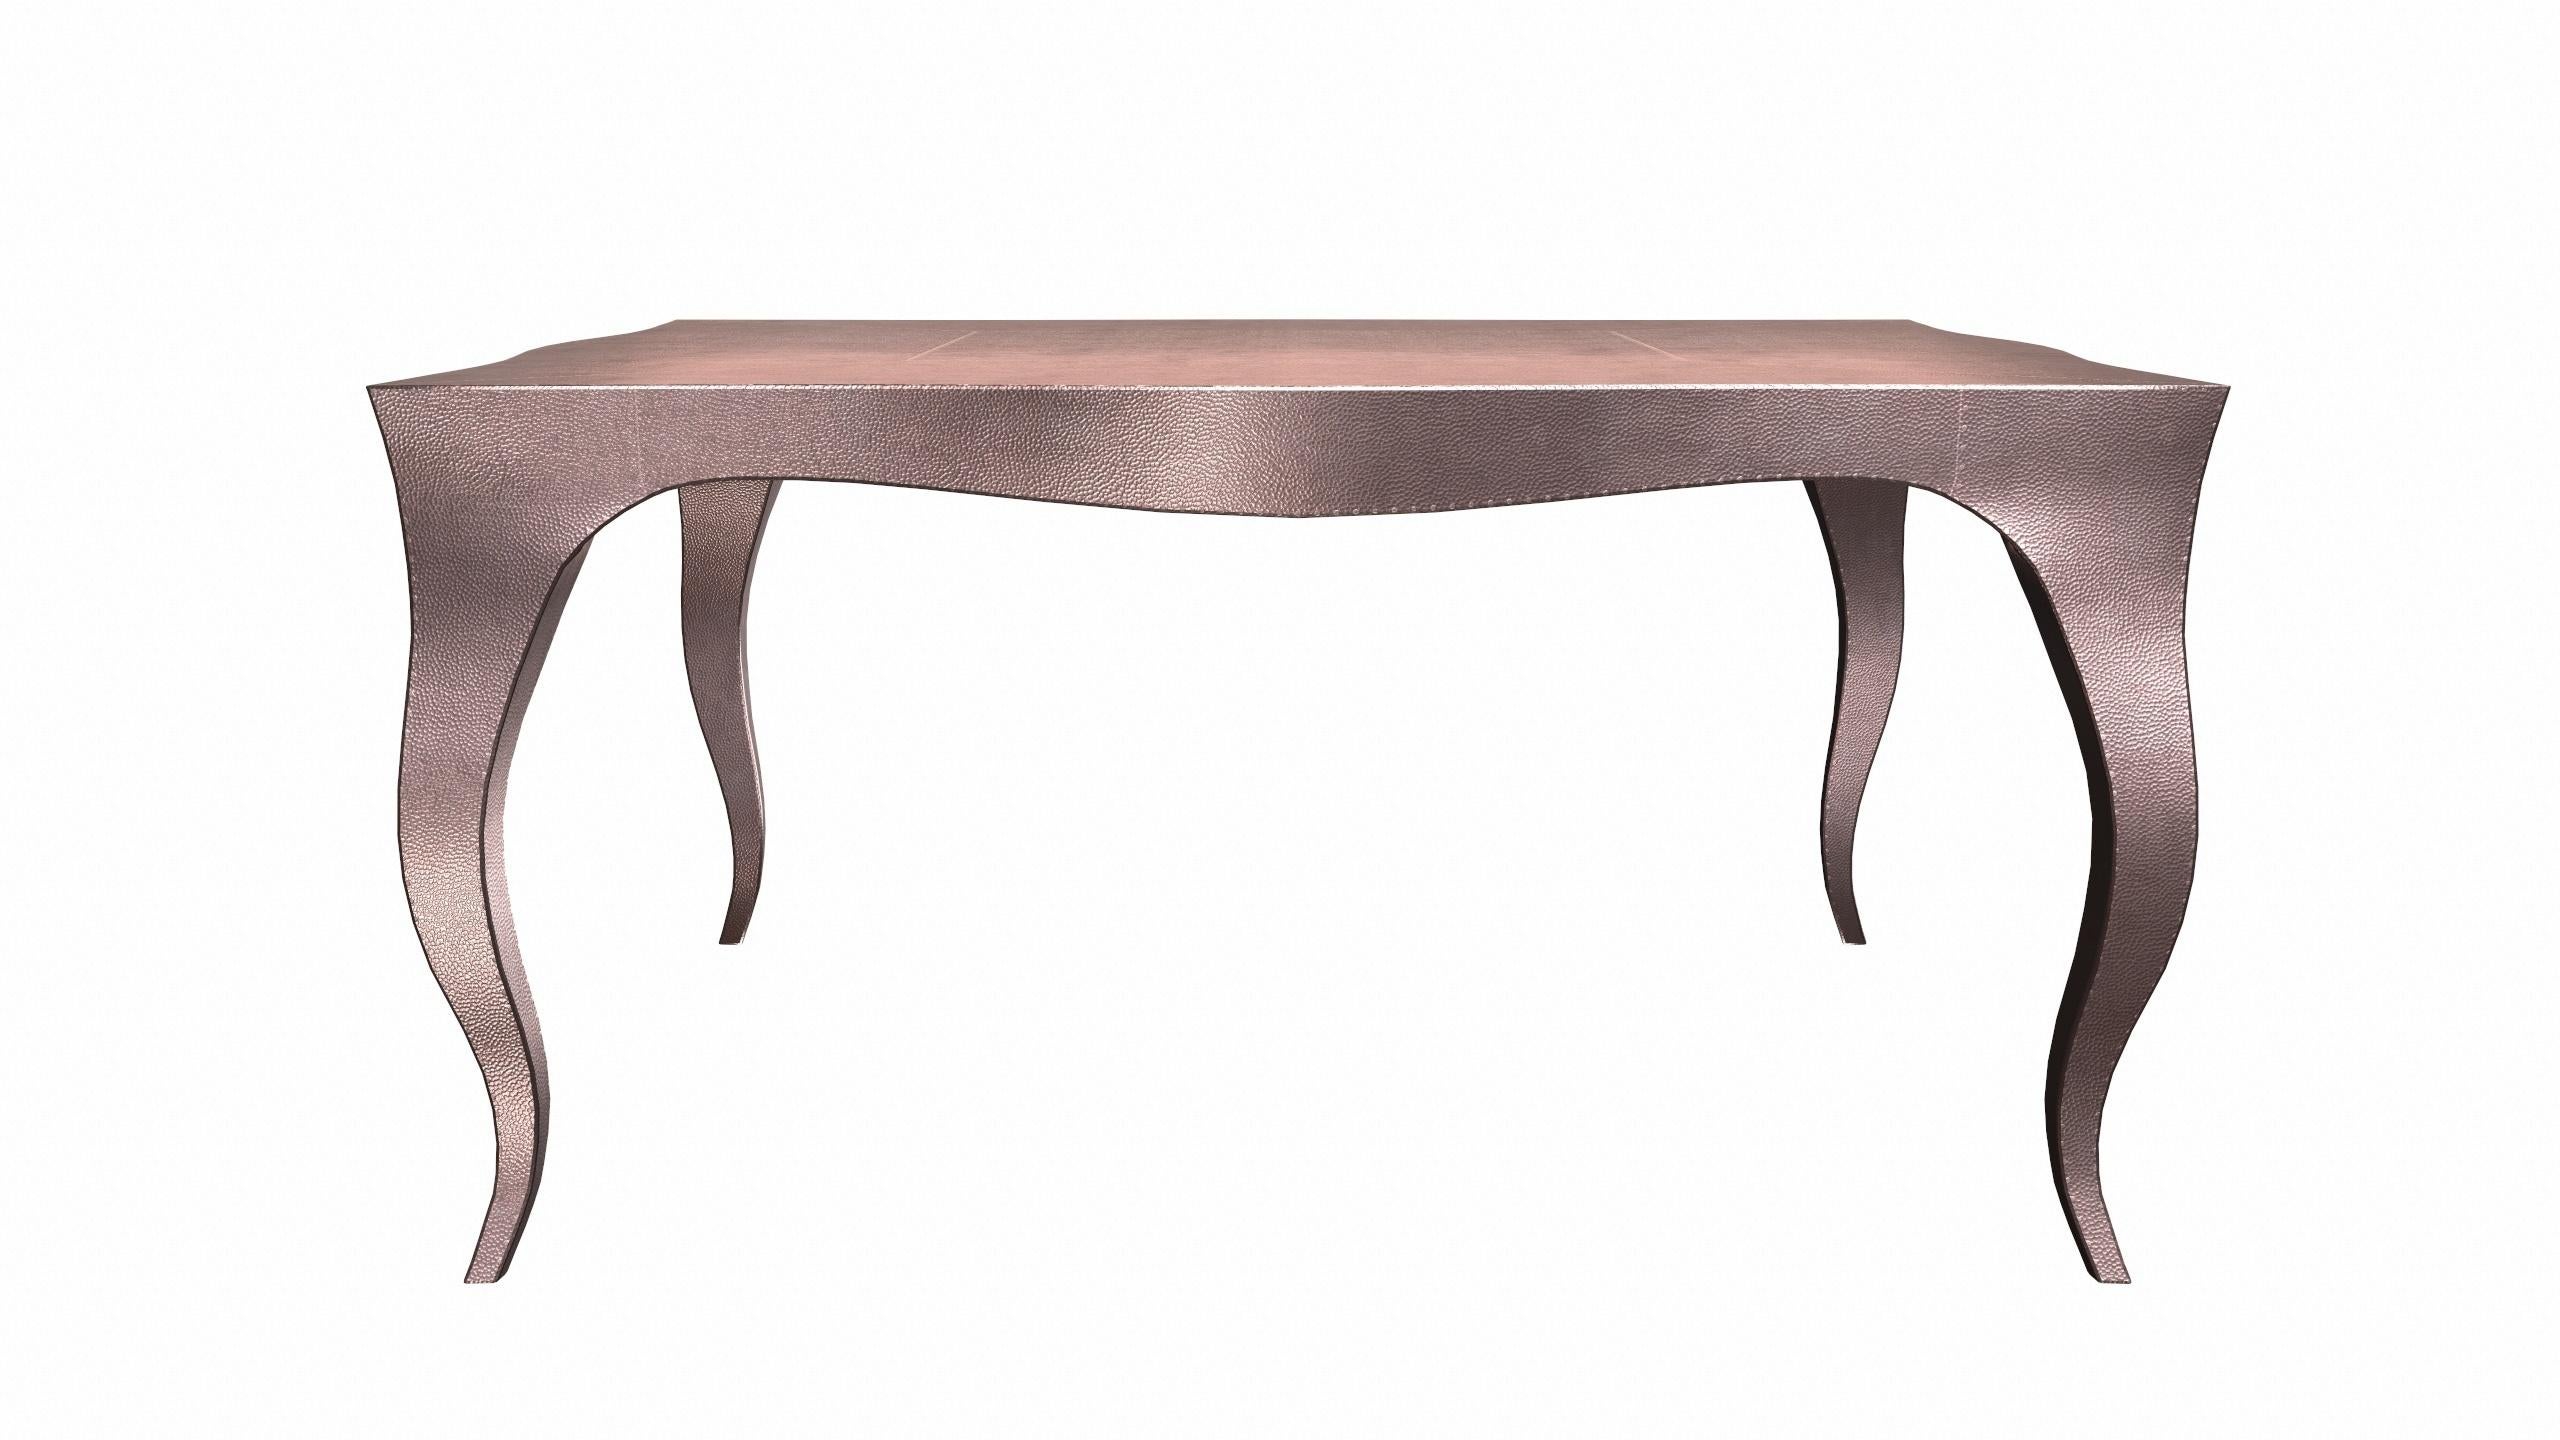 American Louise Art Deco Industrial and Work Tables Mid. Hammered Copper by Paul Mathieu For Sale